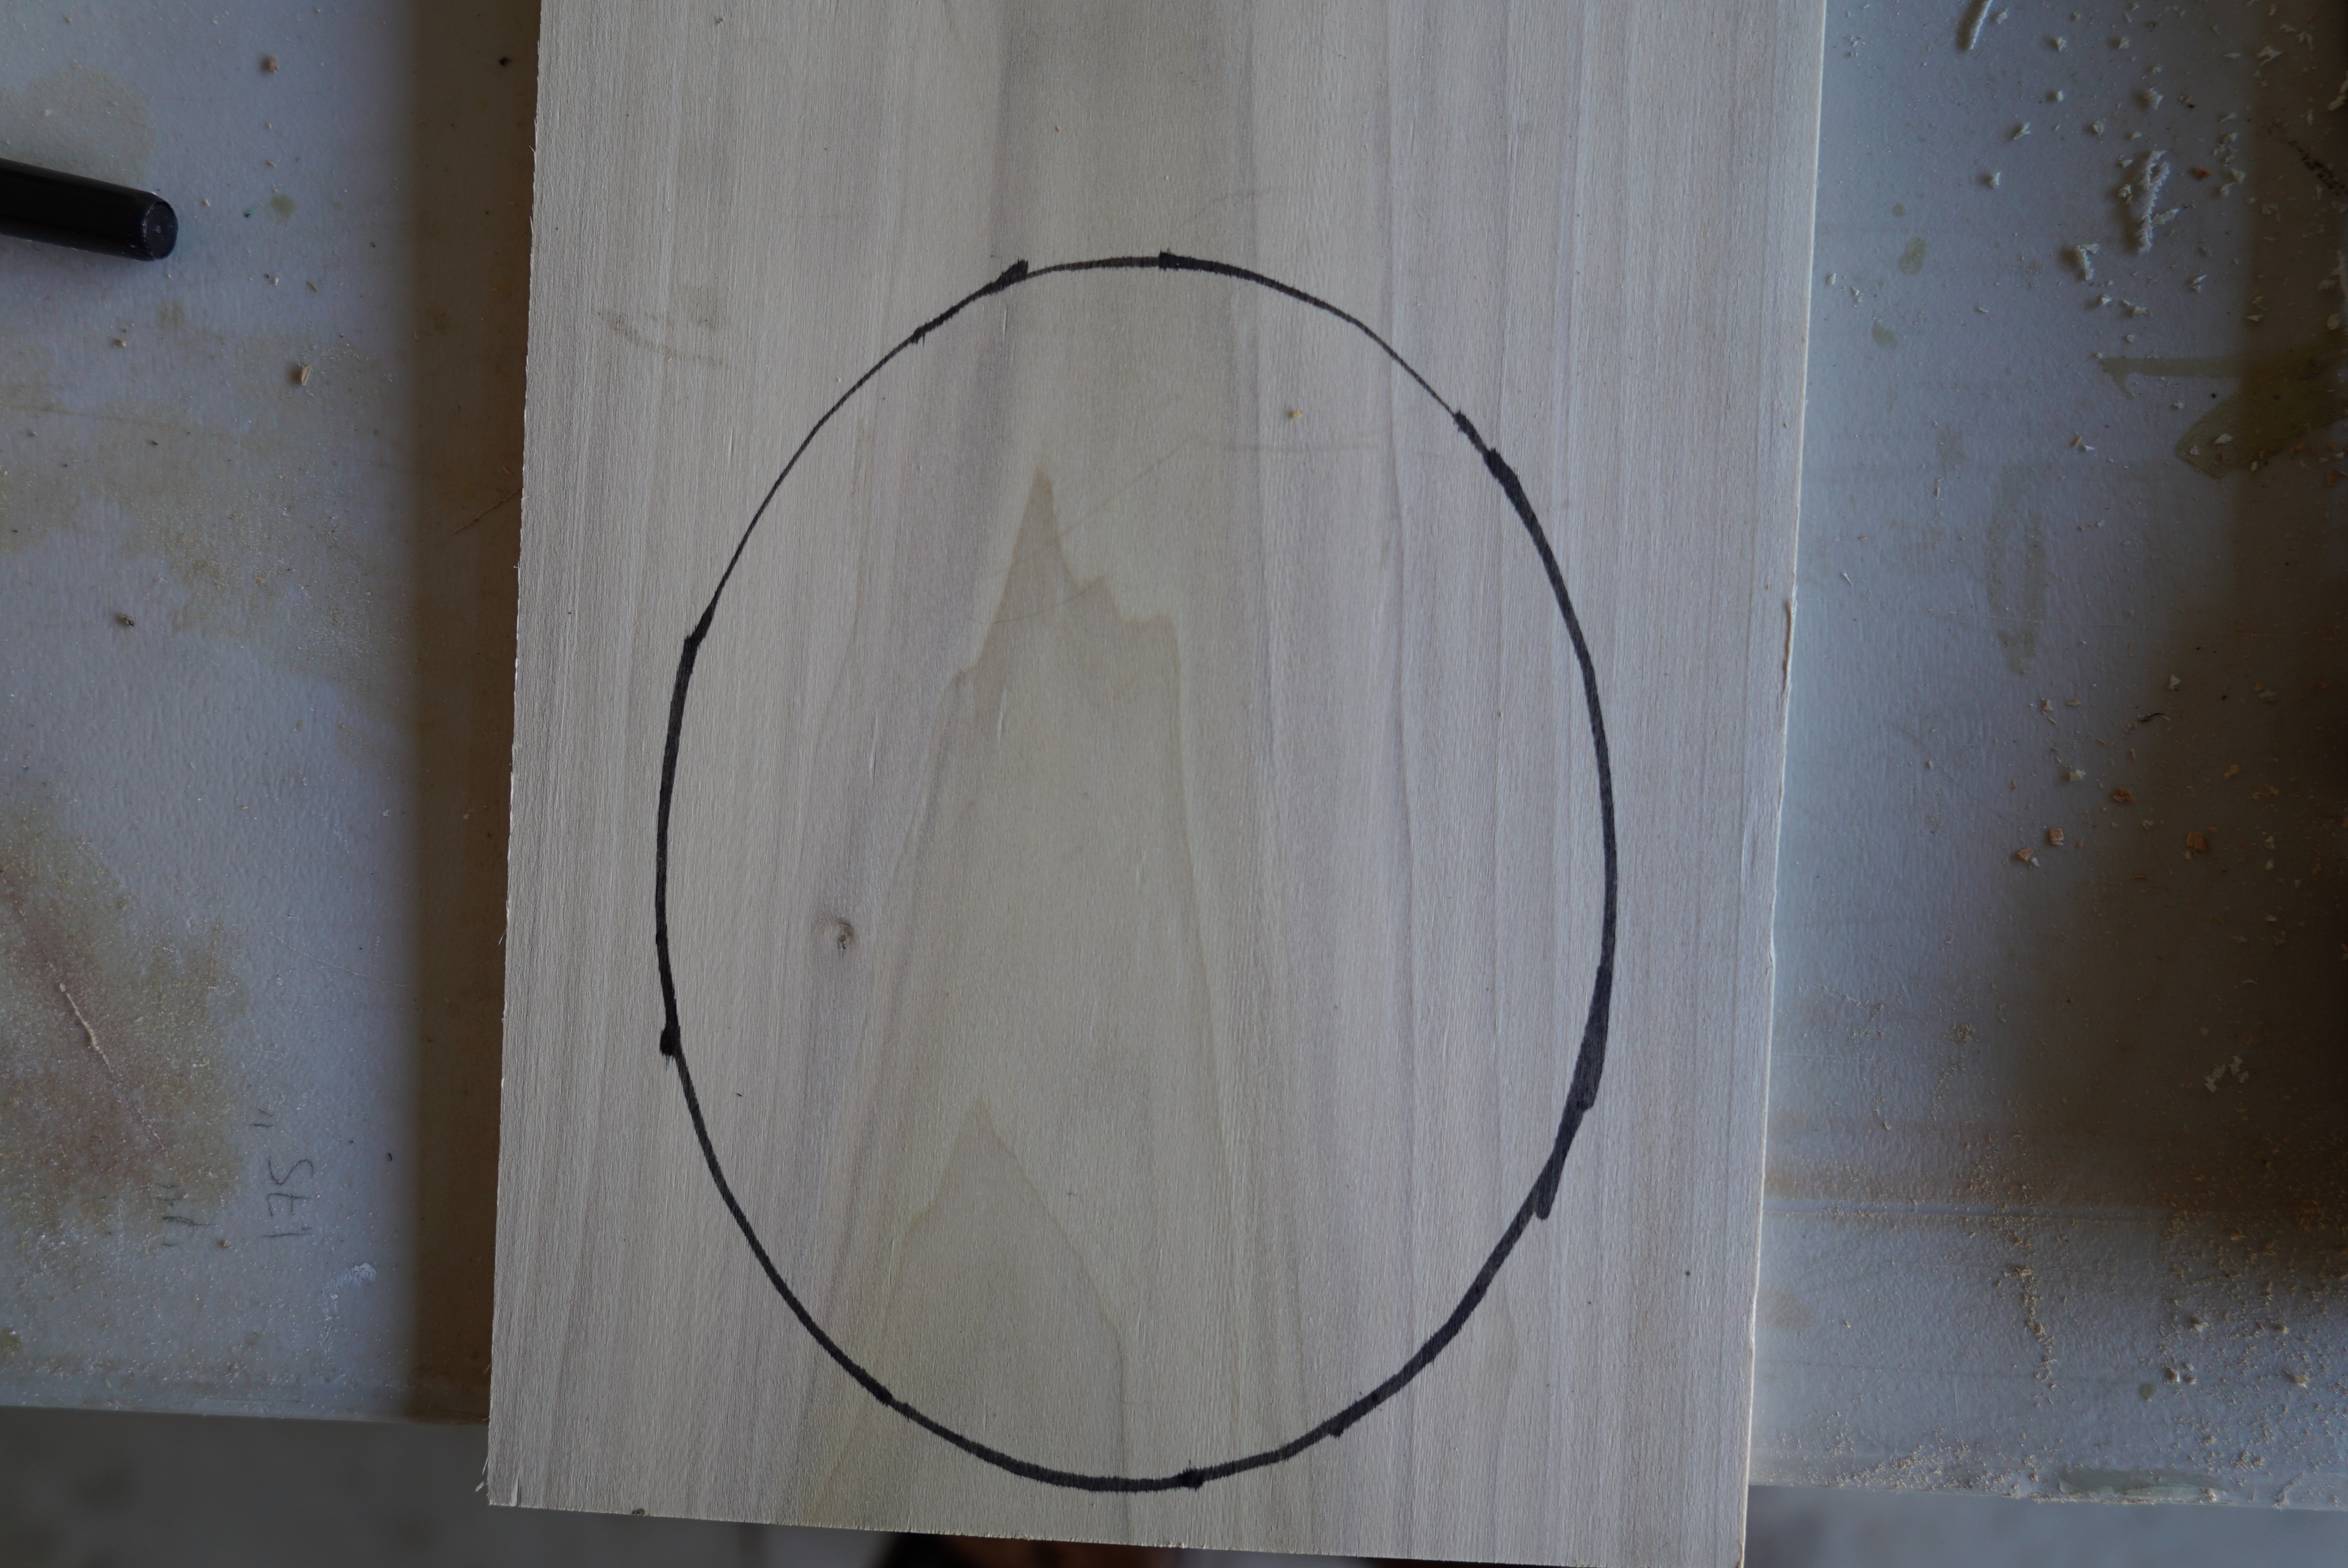 the wood before the circle is cut.